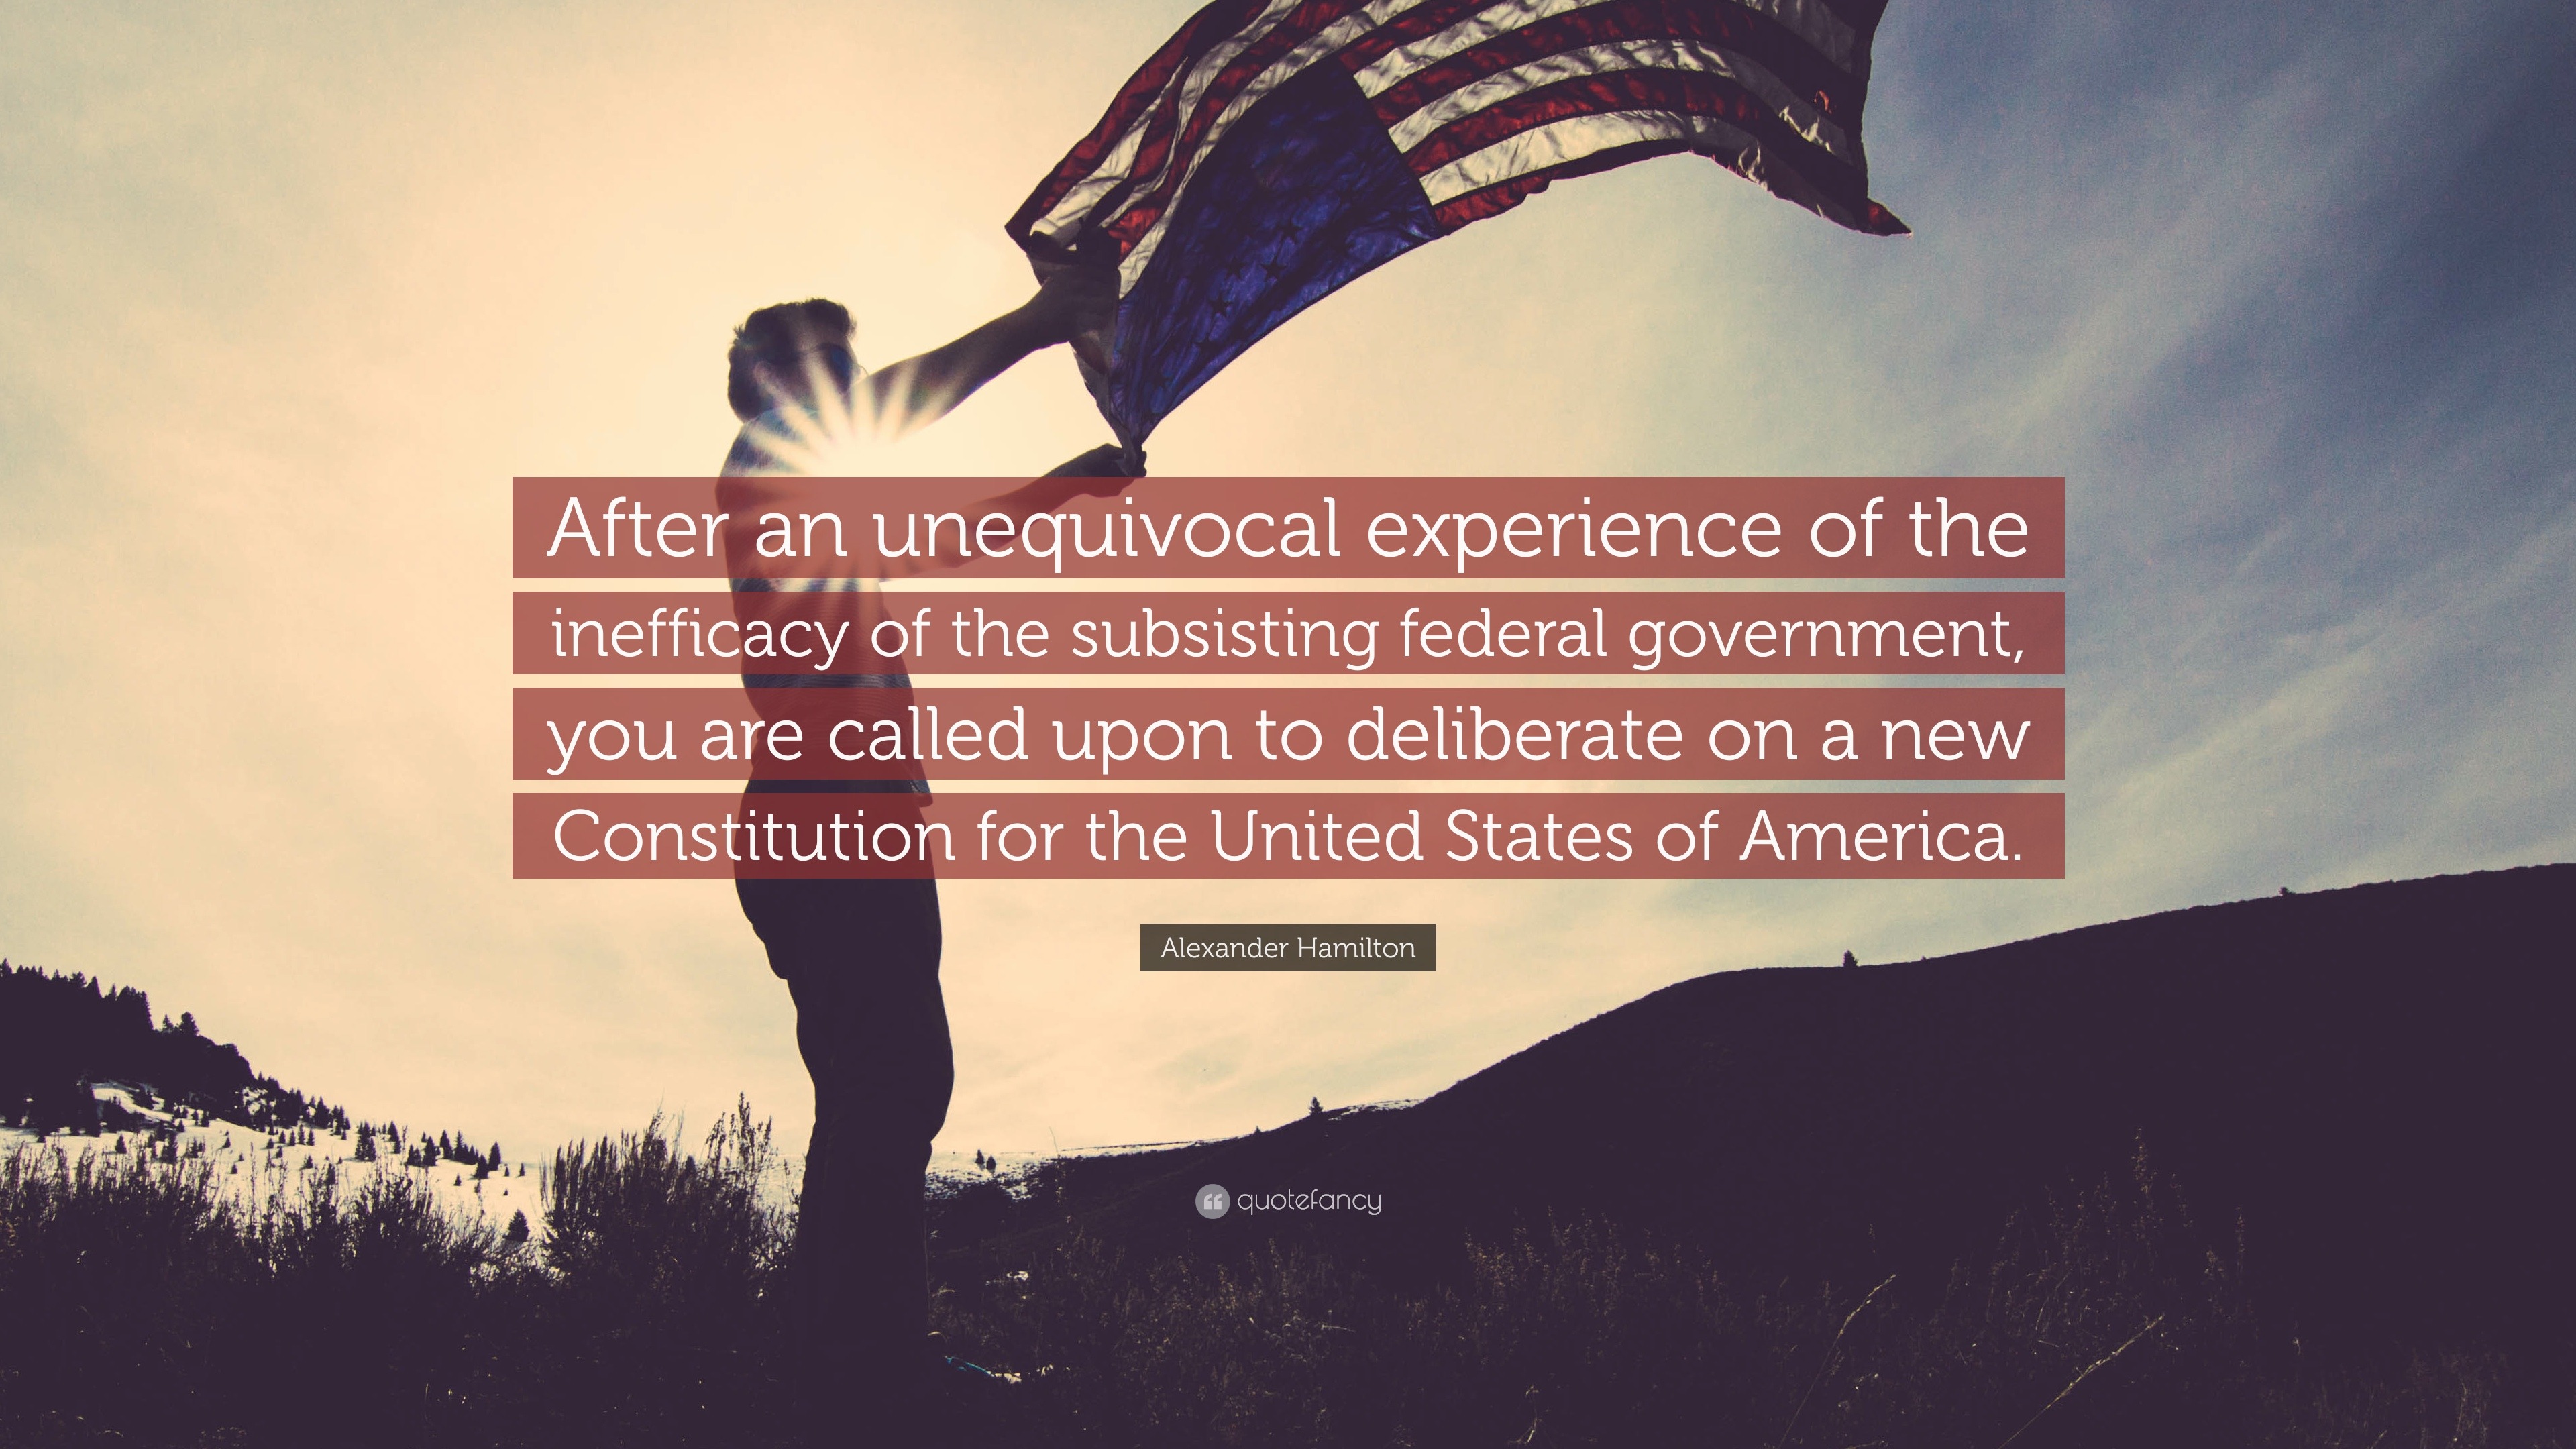 alexander hamilton quote: "after an unequivocal experience of